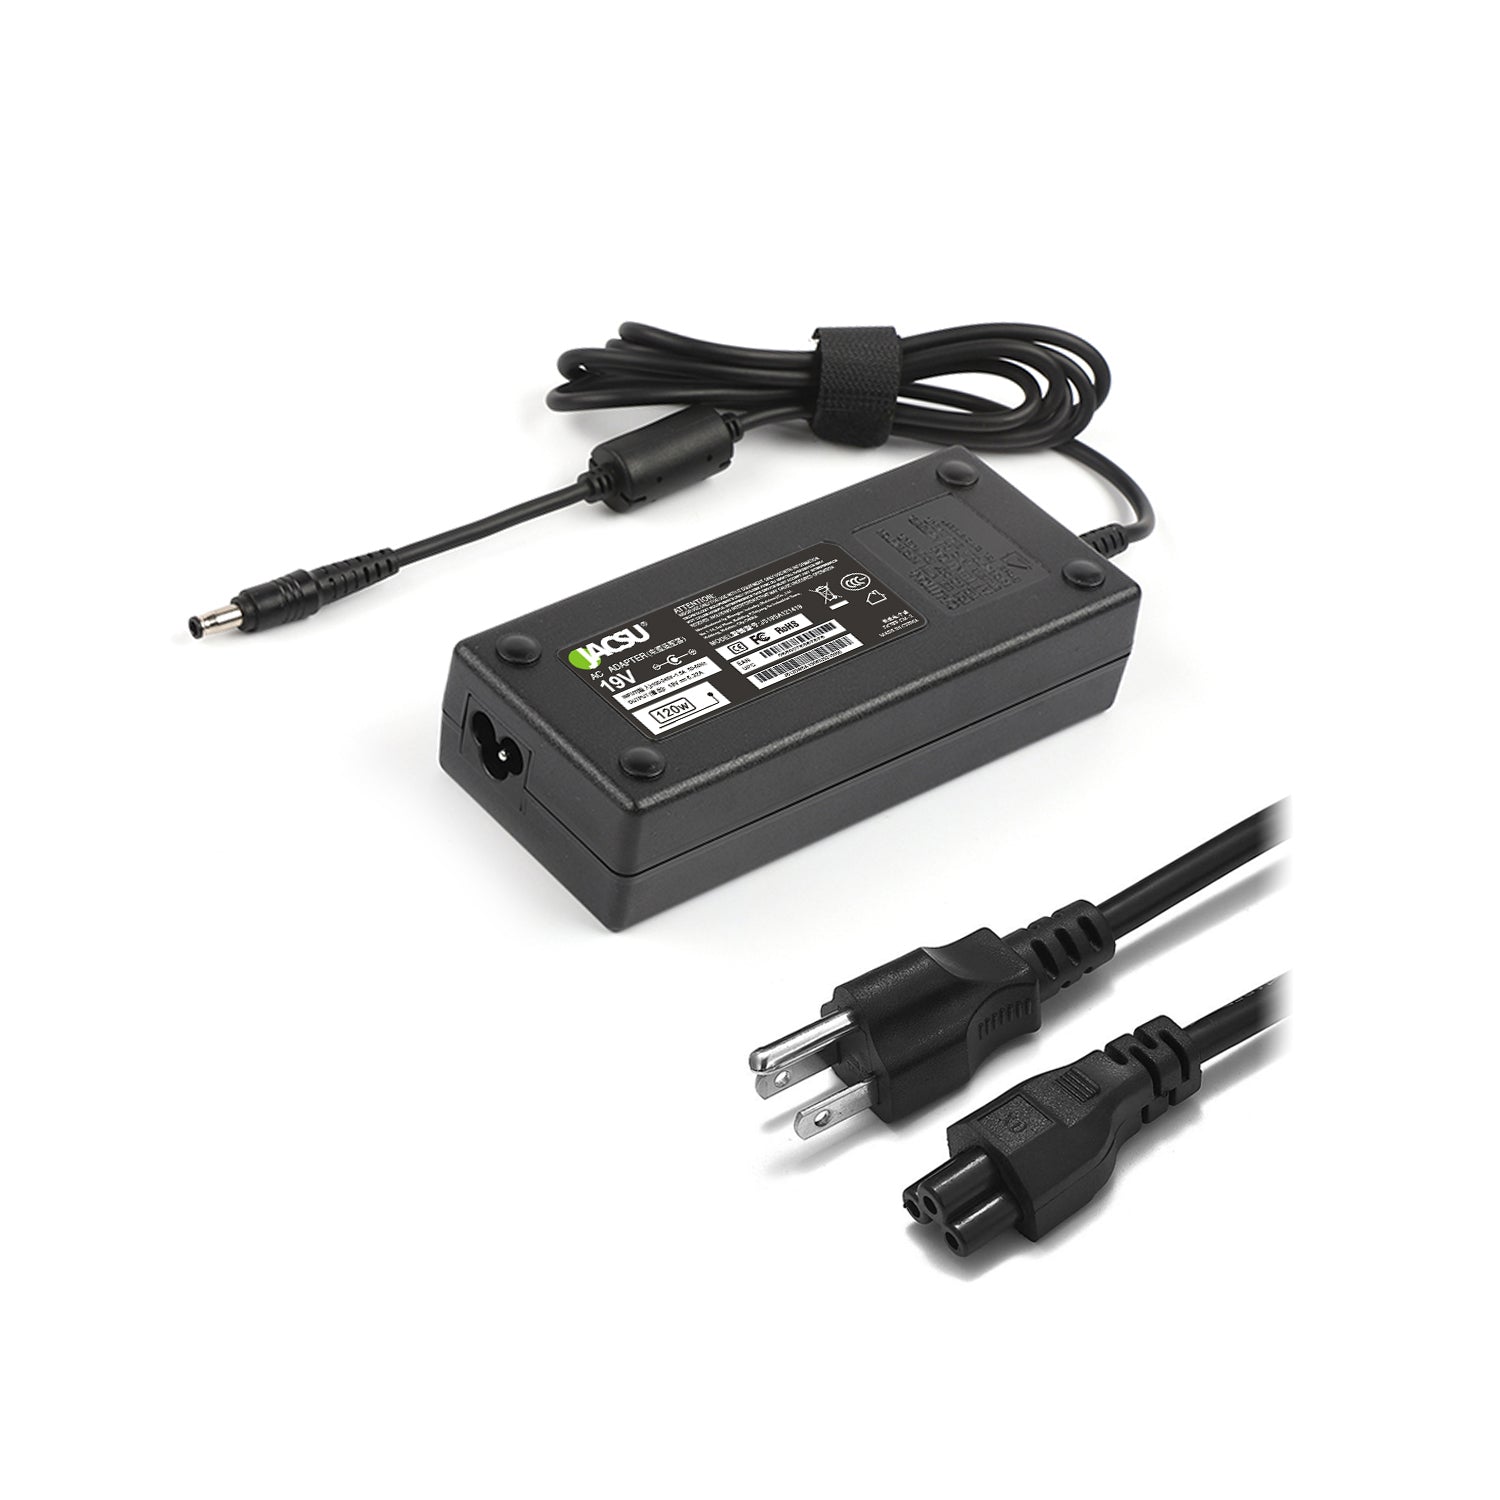 Jacsu 120W 19V 6.32A 5.5X3.0mm AC Adapter/Charger For SAMSUNG Laptop ALL IN ONE SERIES,R70,R508,R560